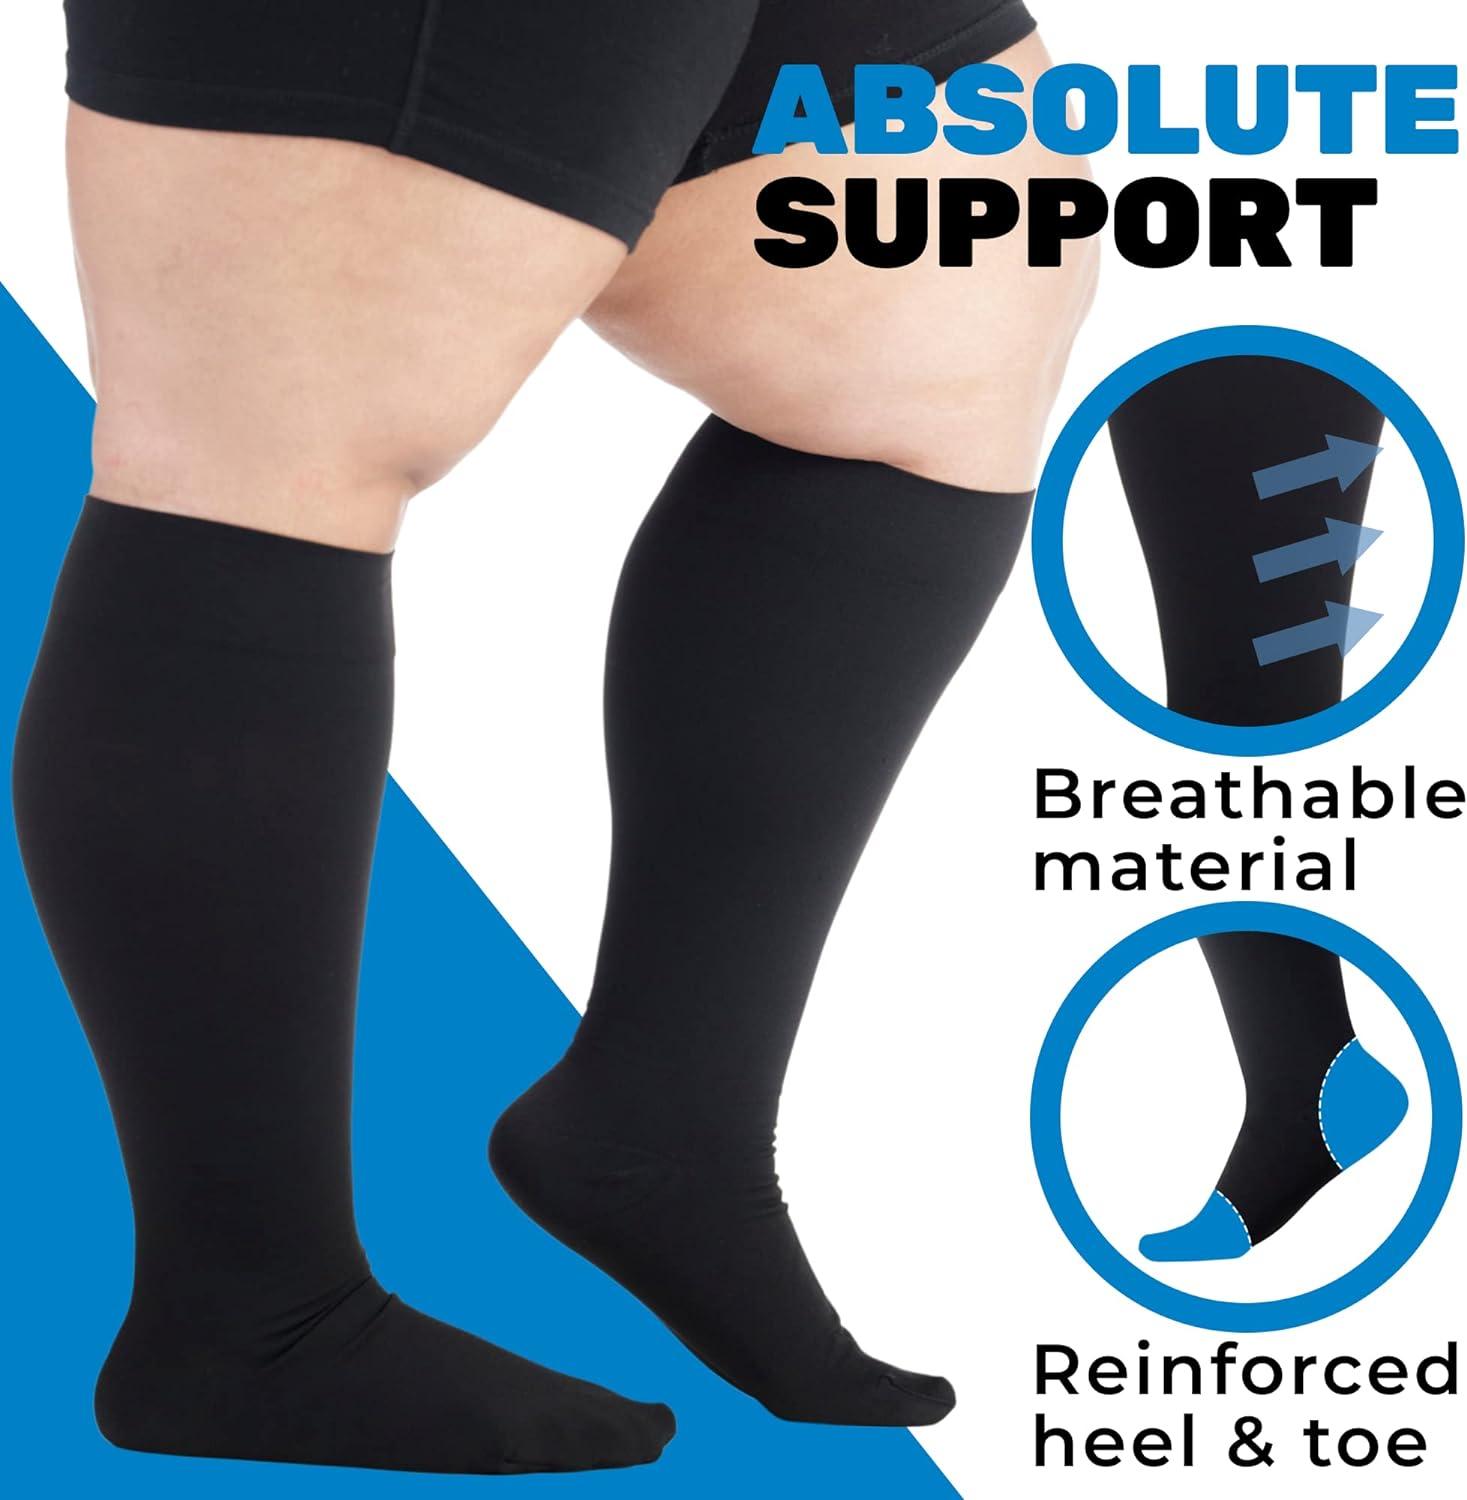 3 pack) Wide Calf Compression Support Stockings for Men and Women  Circulation 20-30mmHg - Plus Size Compression Knee Hi Prevents Swelling  Pain Varicose Veins Edema - Black 4X-Large 4X-Large Black